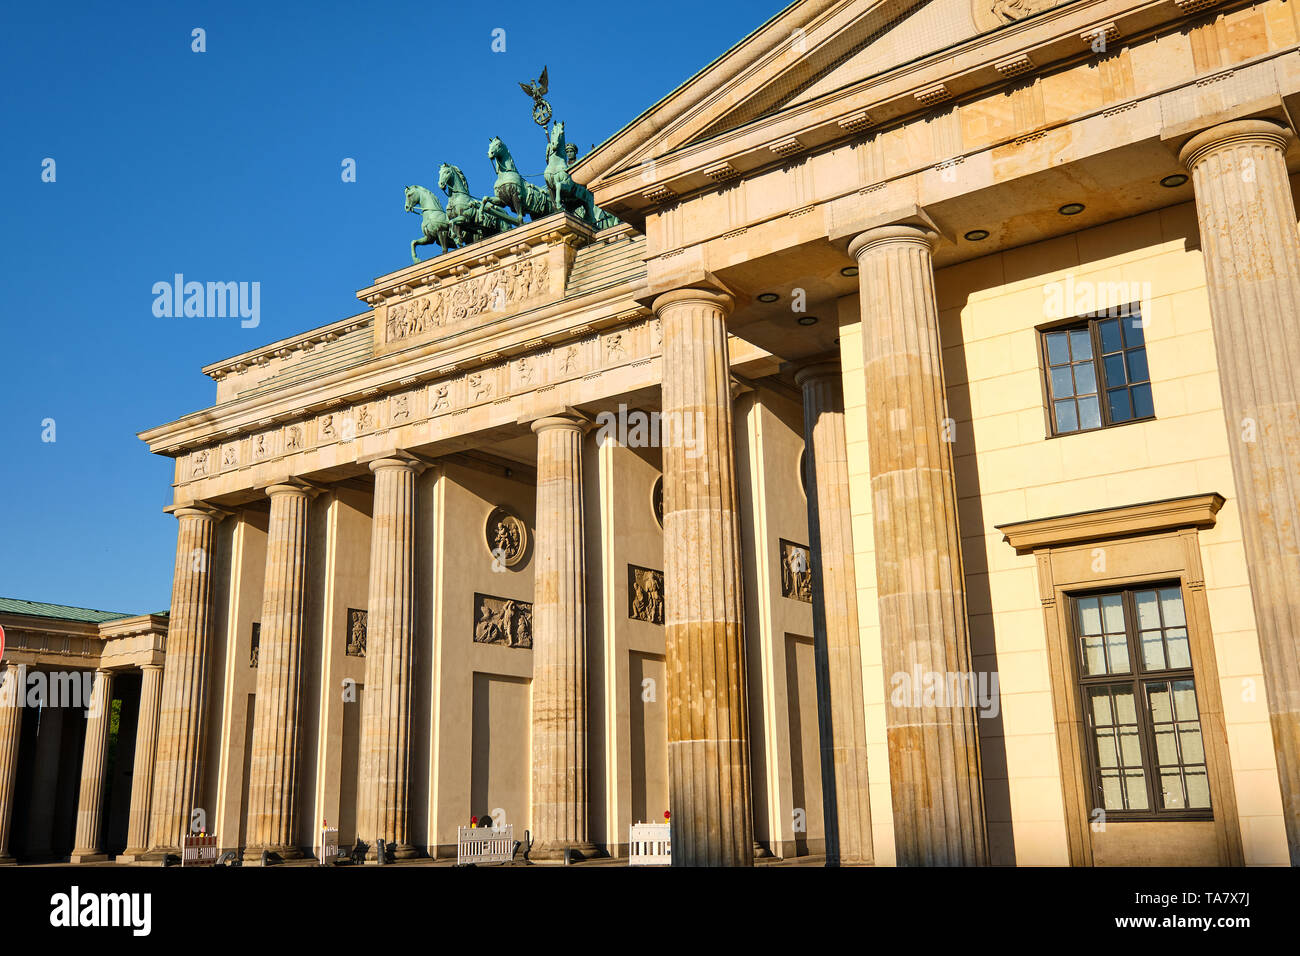 The famous Brandenburg Gate in Berlin after sunrise Stock Photo